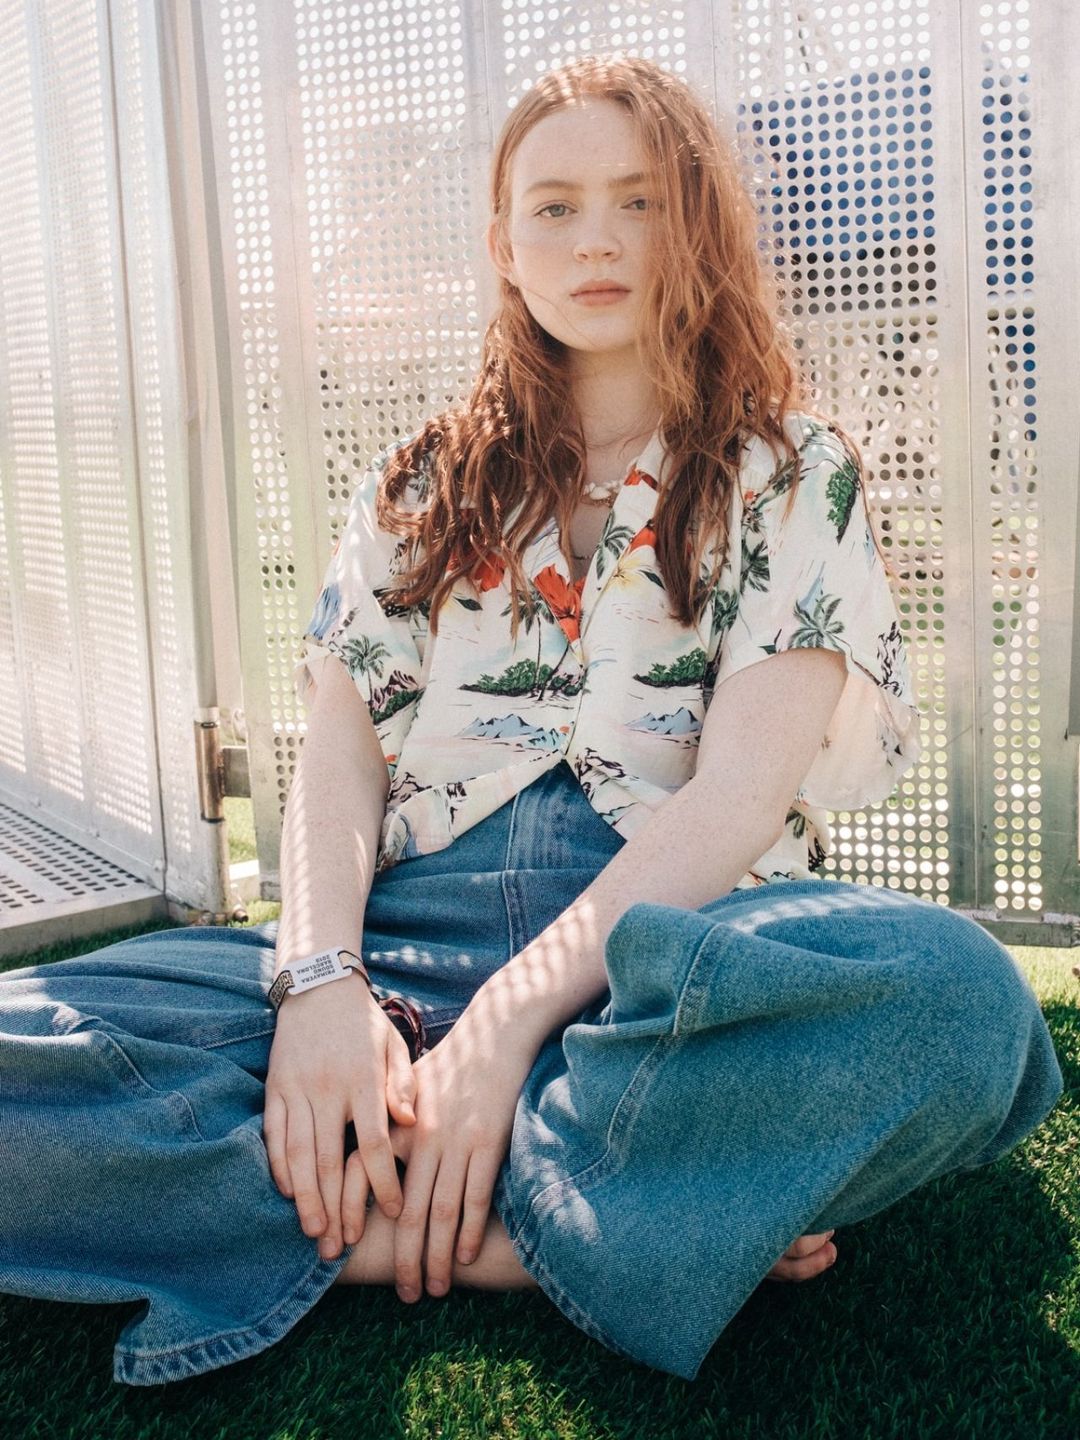 Sadie Sink who is her father